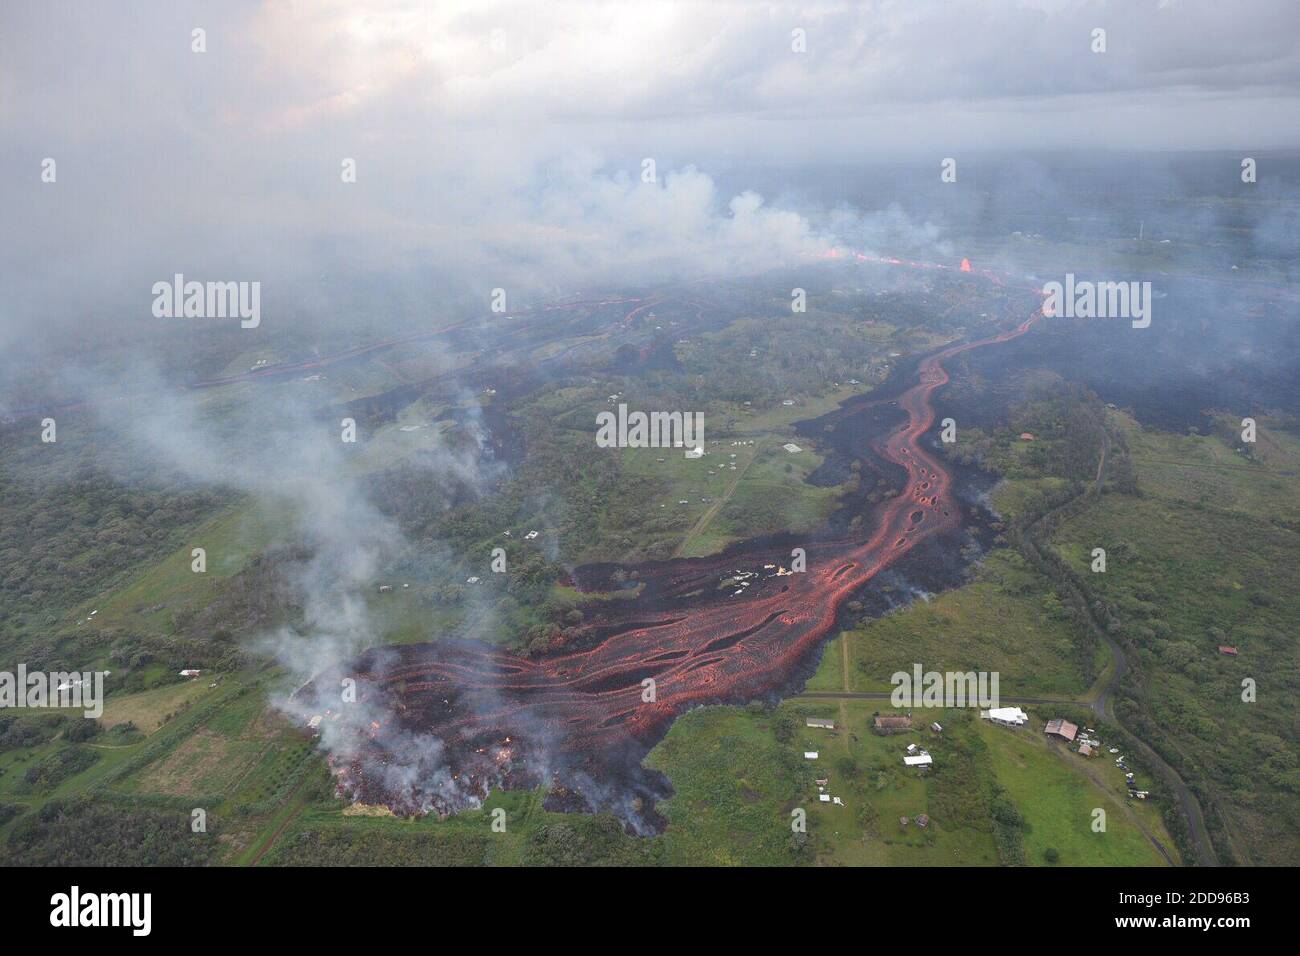 Handout photo taken on May 19, 2018 of KÄ«lauea Volcano — Channelized Lava Flow. Channelized lava emerges from the elongated fissure 16-20 (in the upper right). Photo taken May 19, 2018, at 8:18 AM HST. Photo by usgs via ABACAPRESS.COM Stock Photo